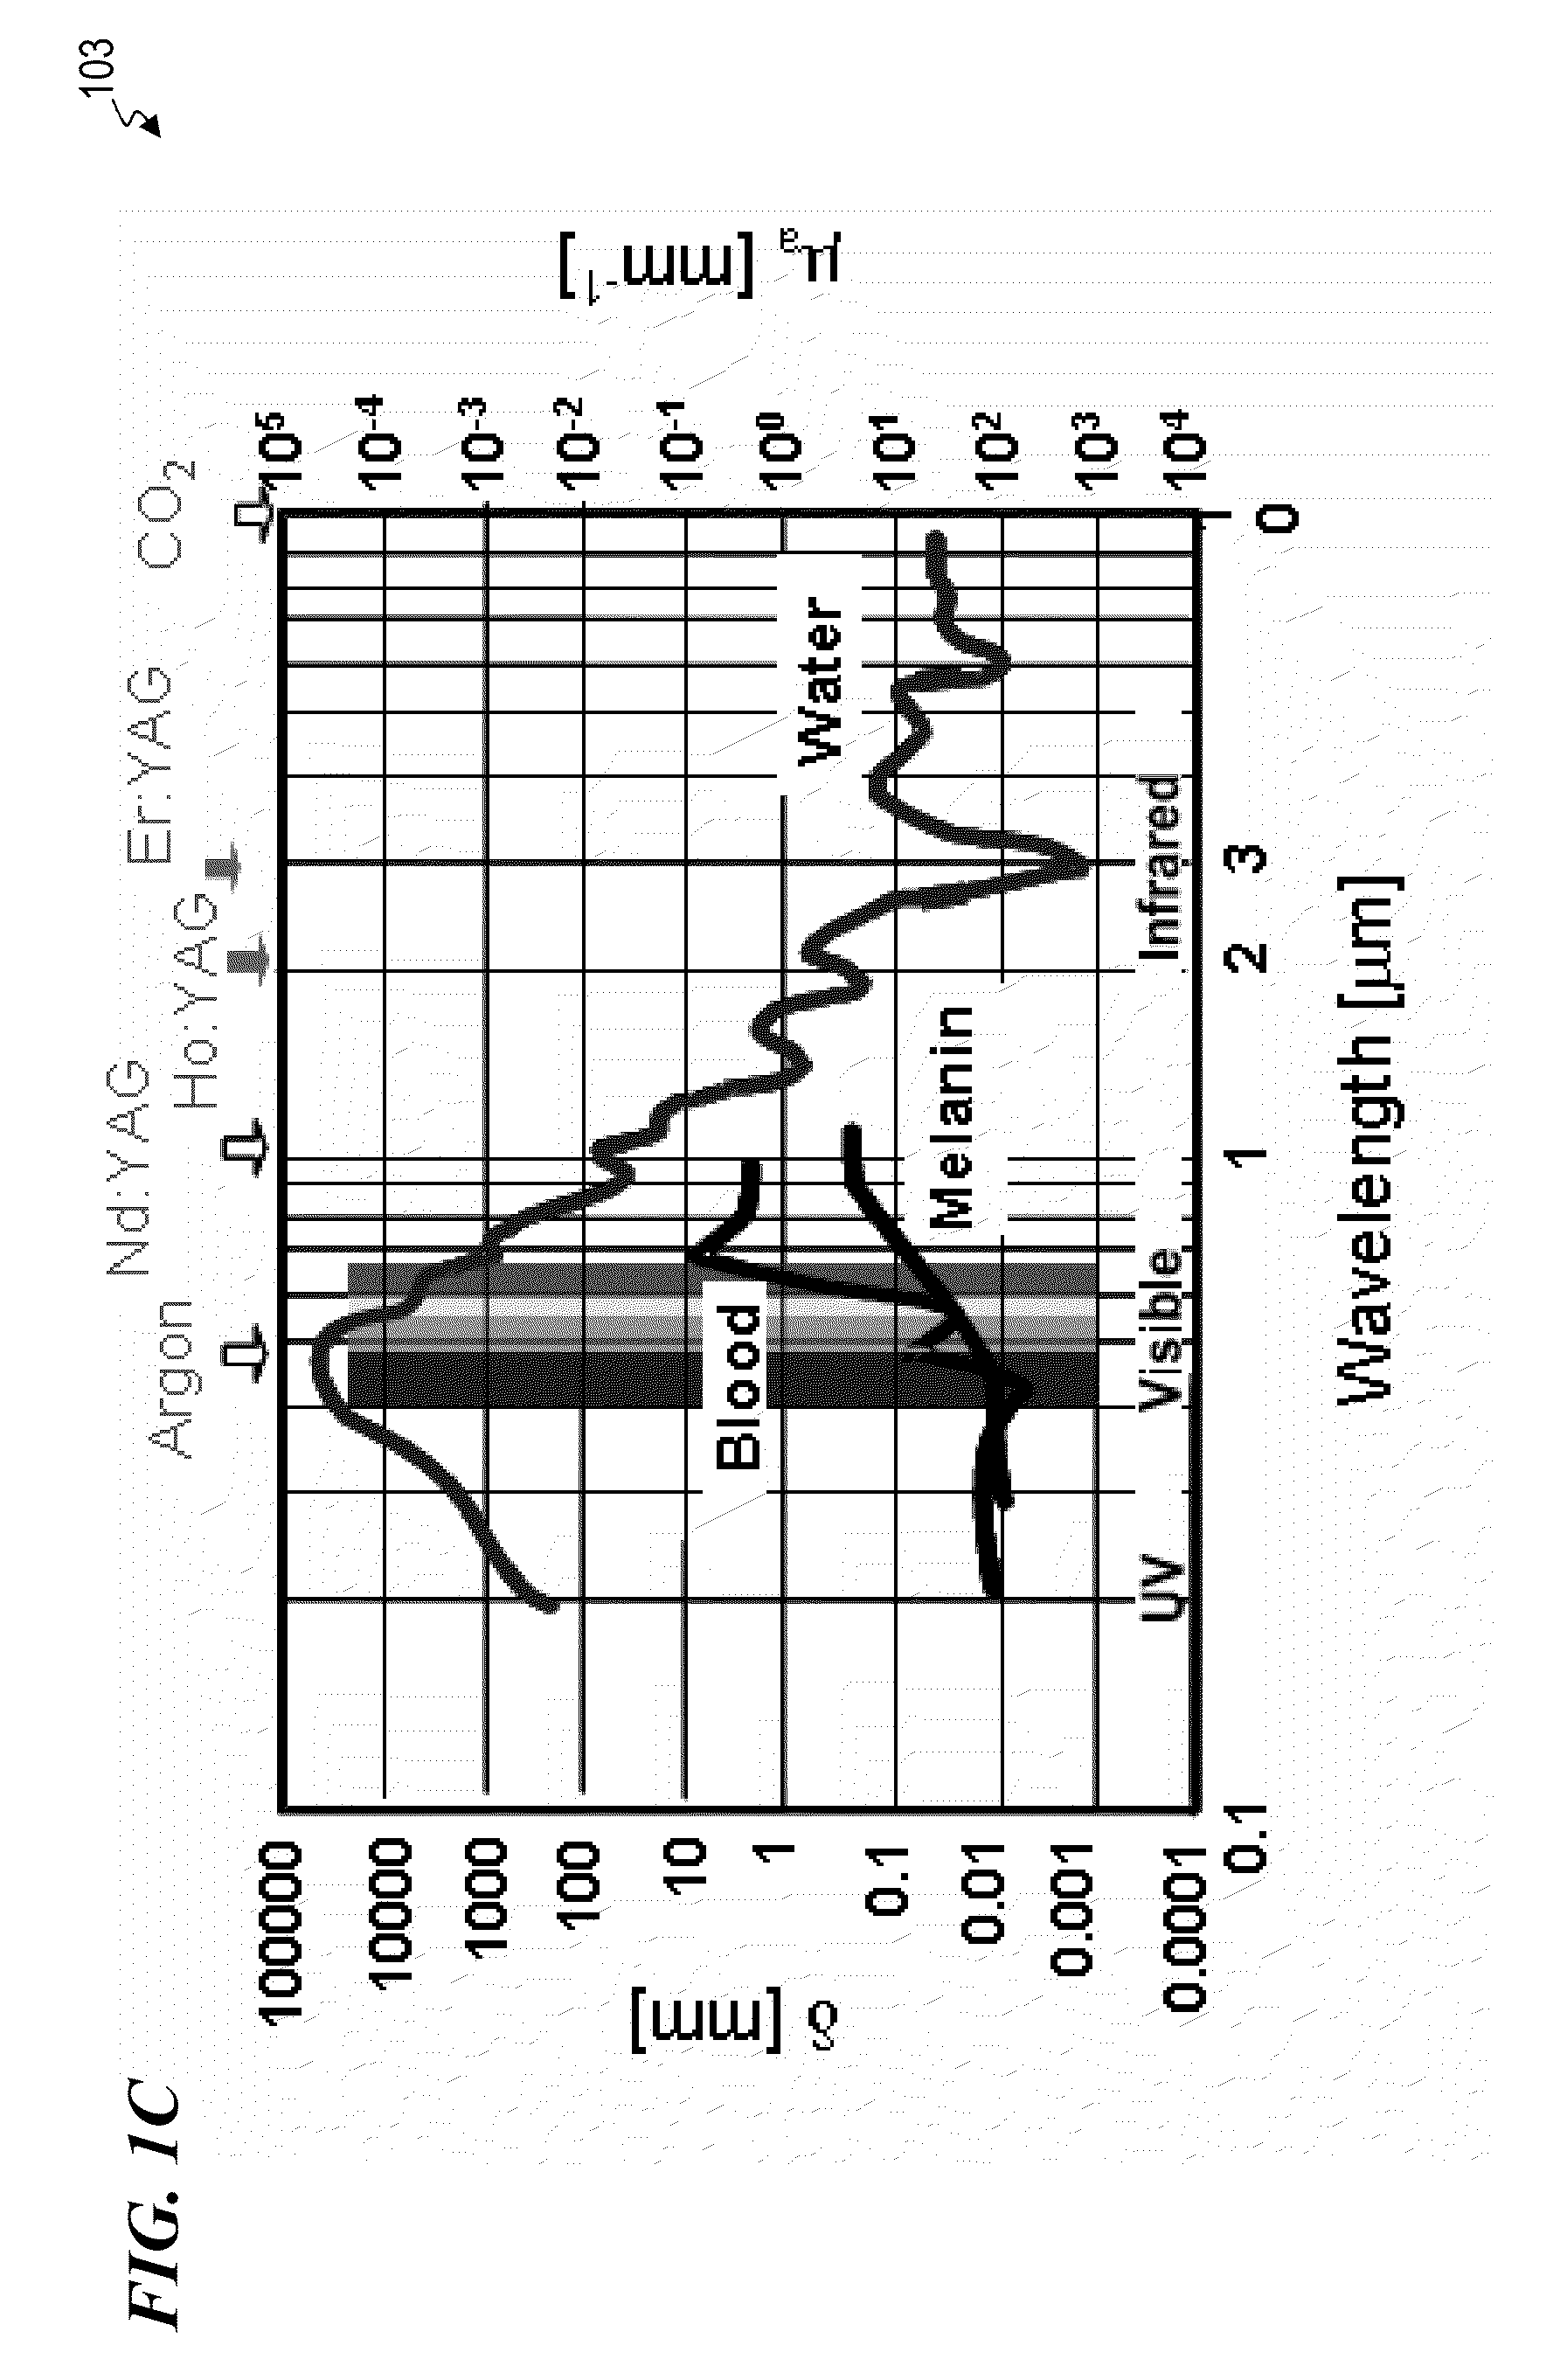 System and method for conditioning animal tissue using laser light